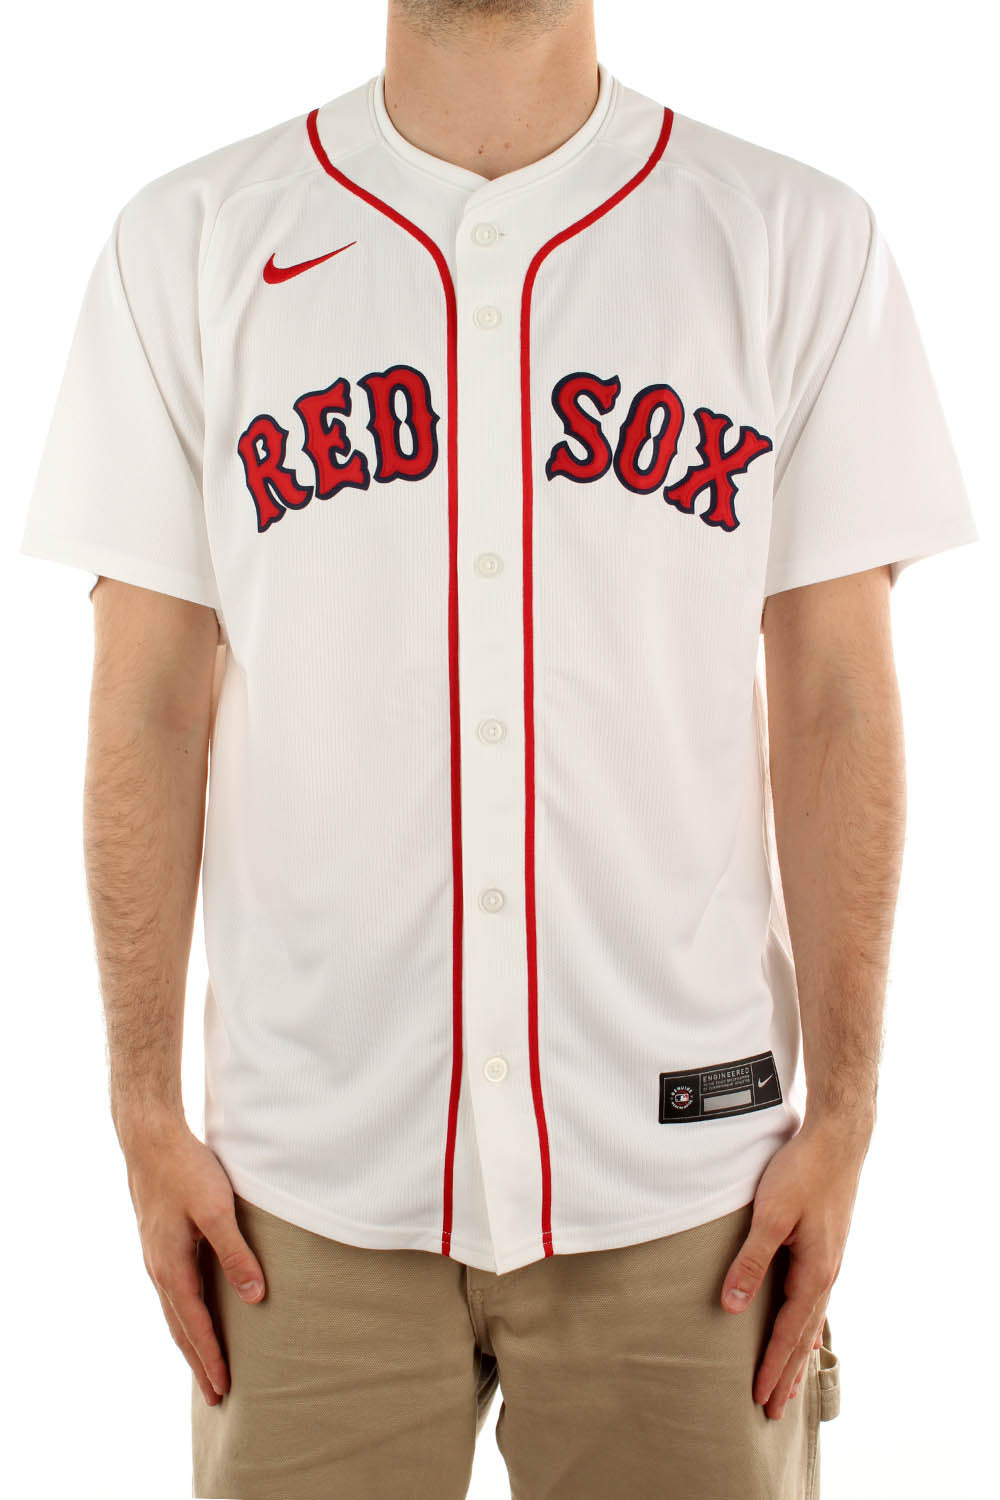 Nike Mlb Limited Home Jersey Boston Red Sox